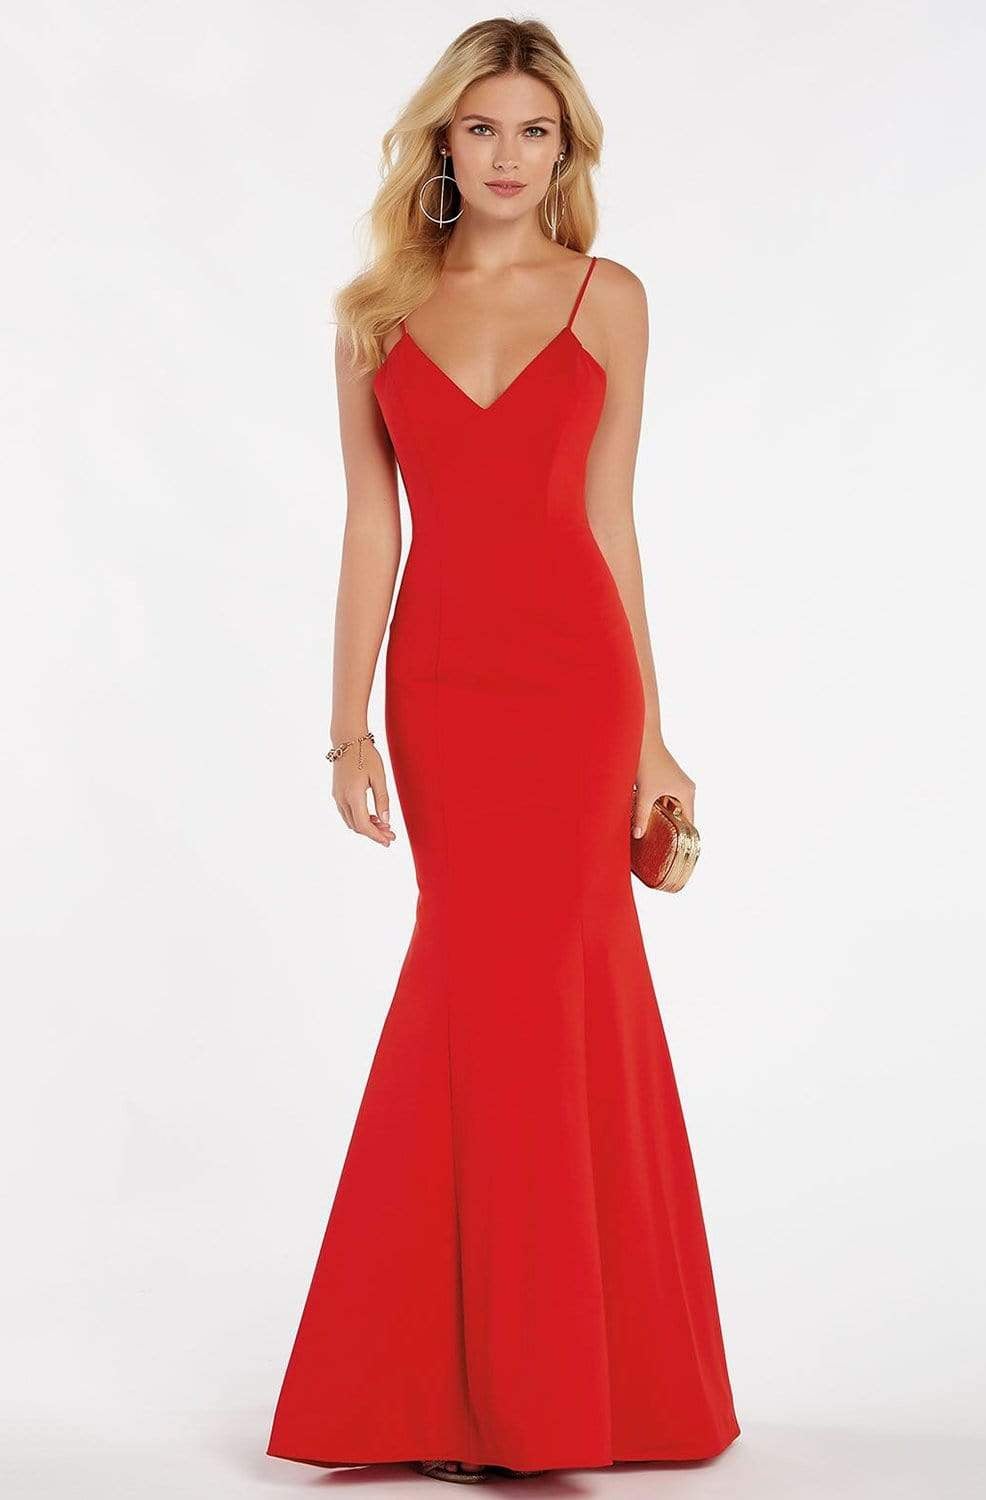 Alyce Paris - 60293 Classy Sleeveless Jersey Mermaid Gown Special Occasion Dress 0 / Red